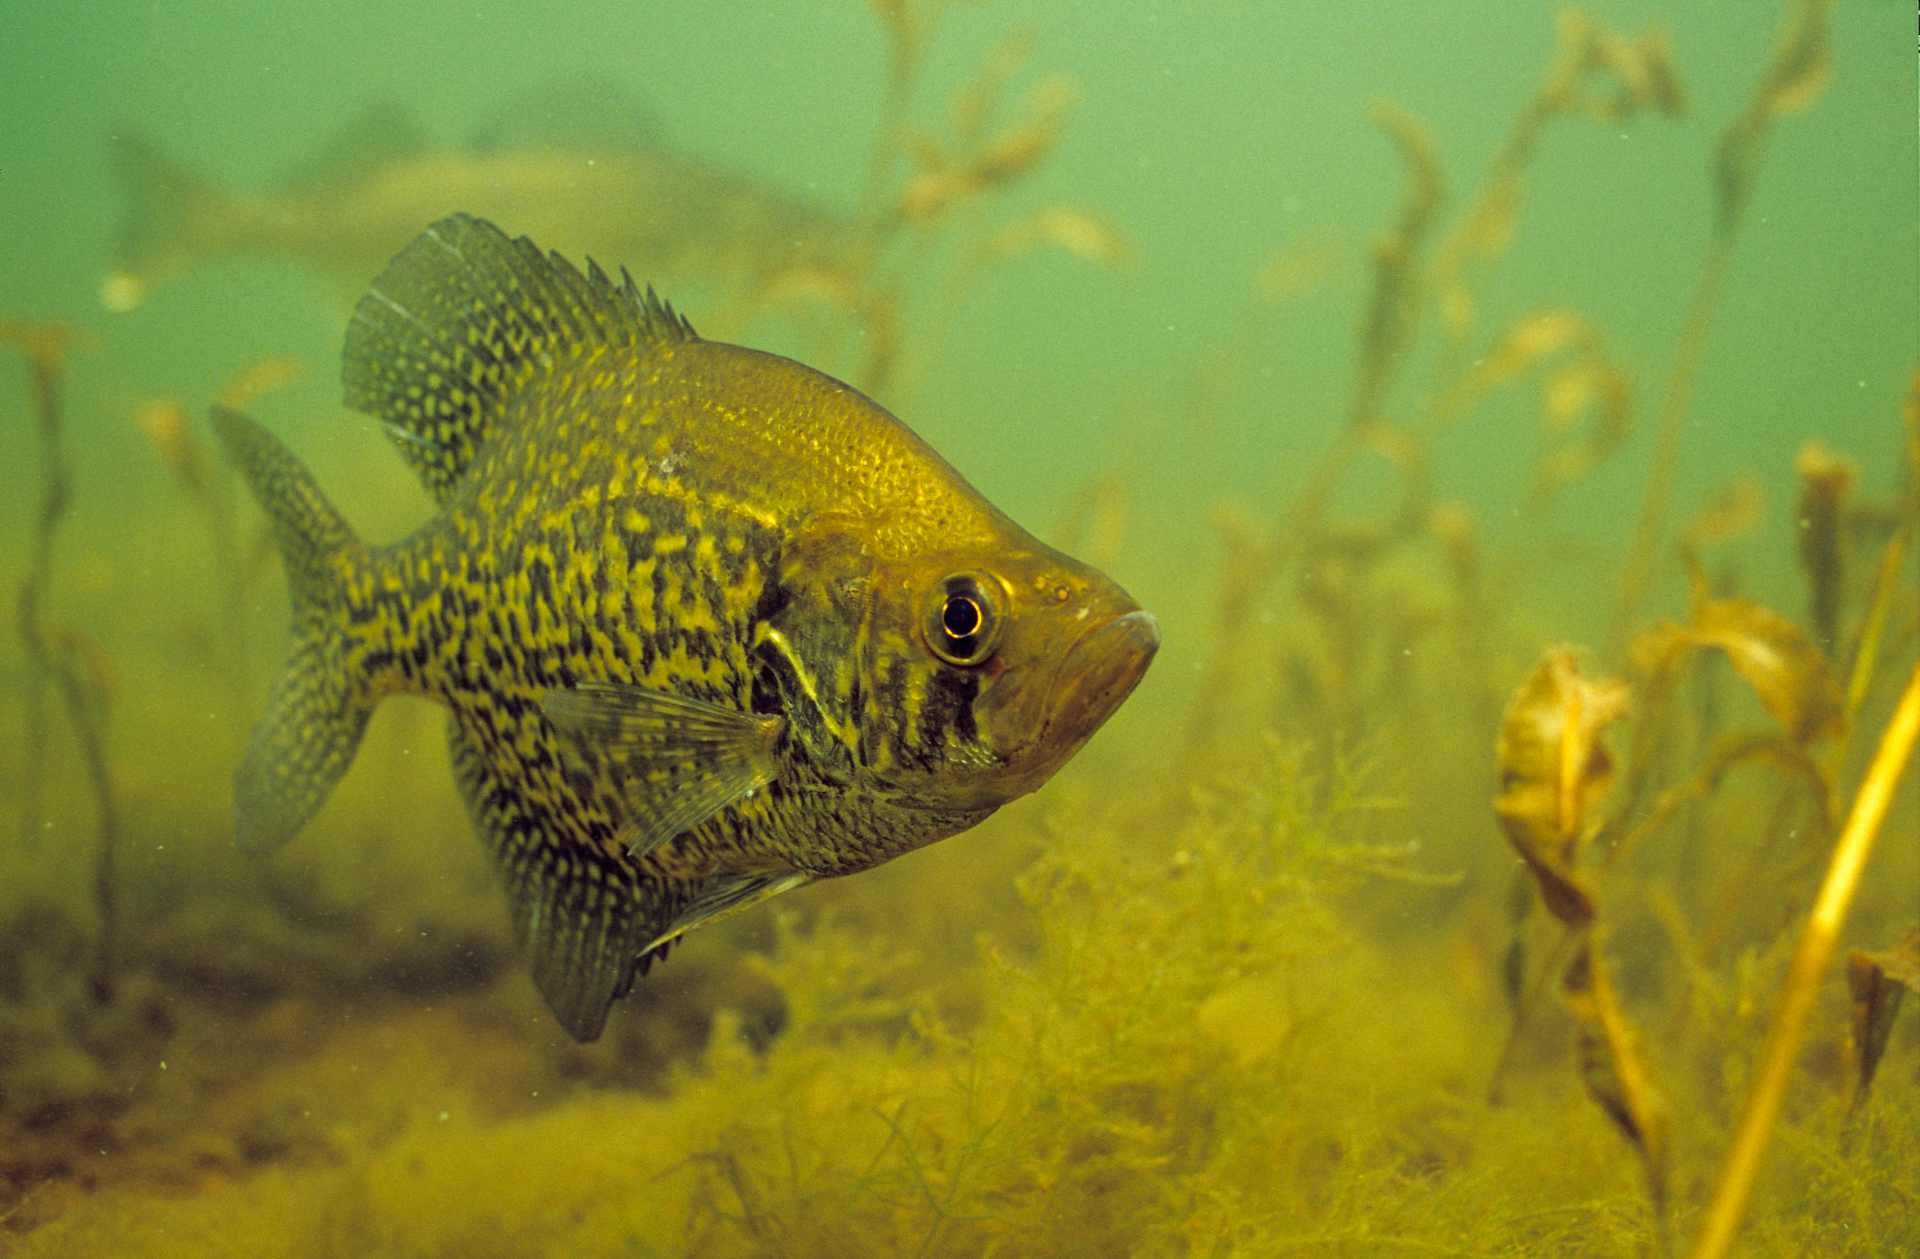 Sonar Study Shows Reveals Little Harm to Crappie Populations